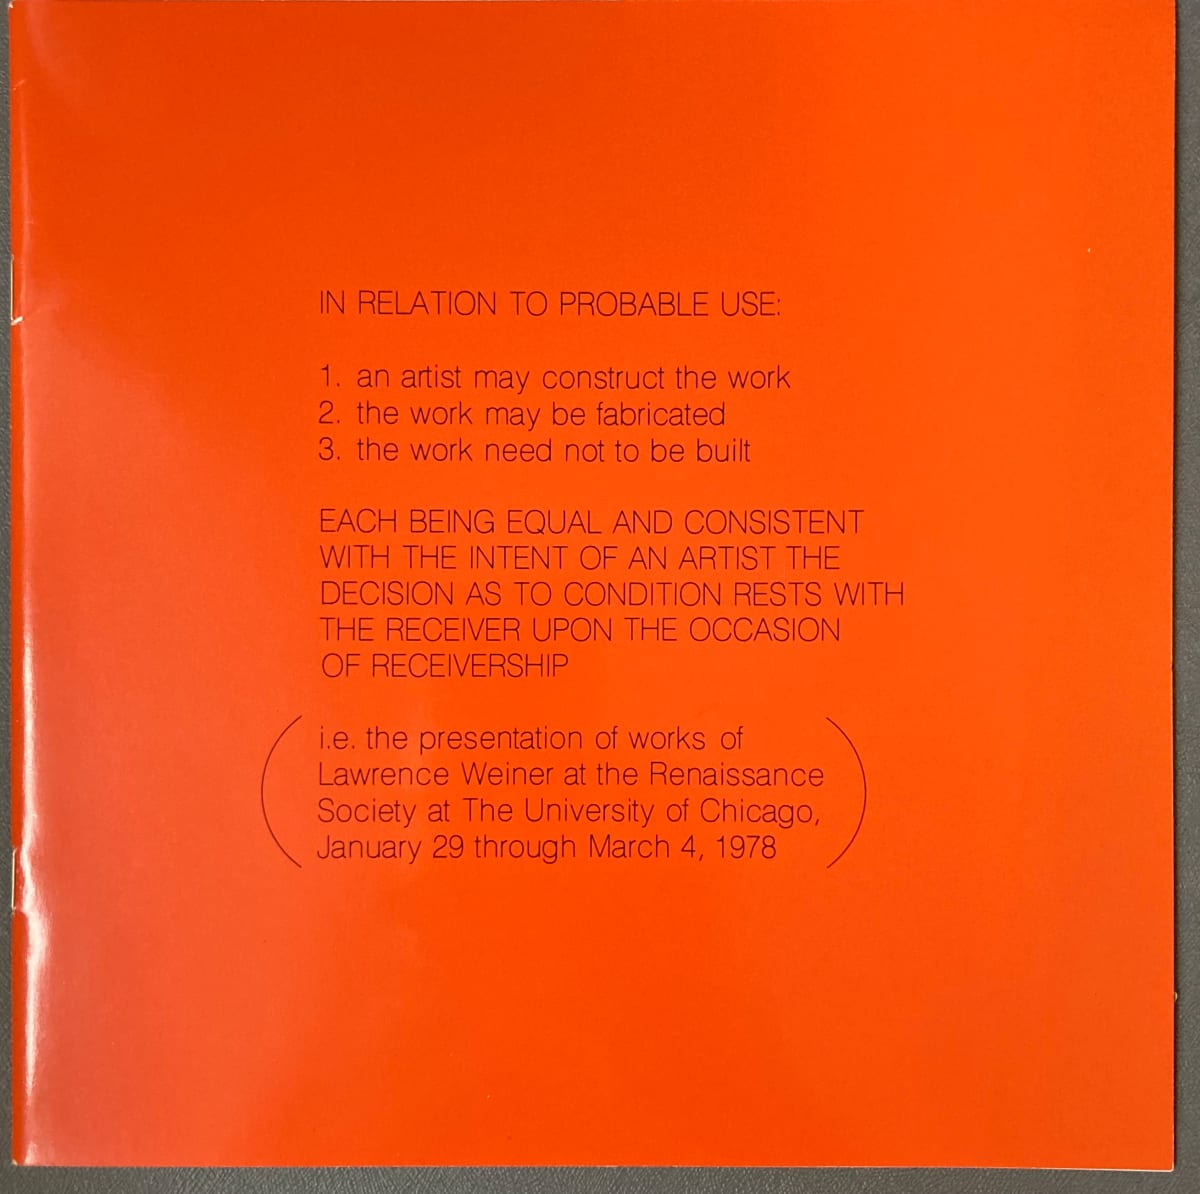 In Relation to Probable Use by Lawrence Weiner 